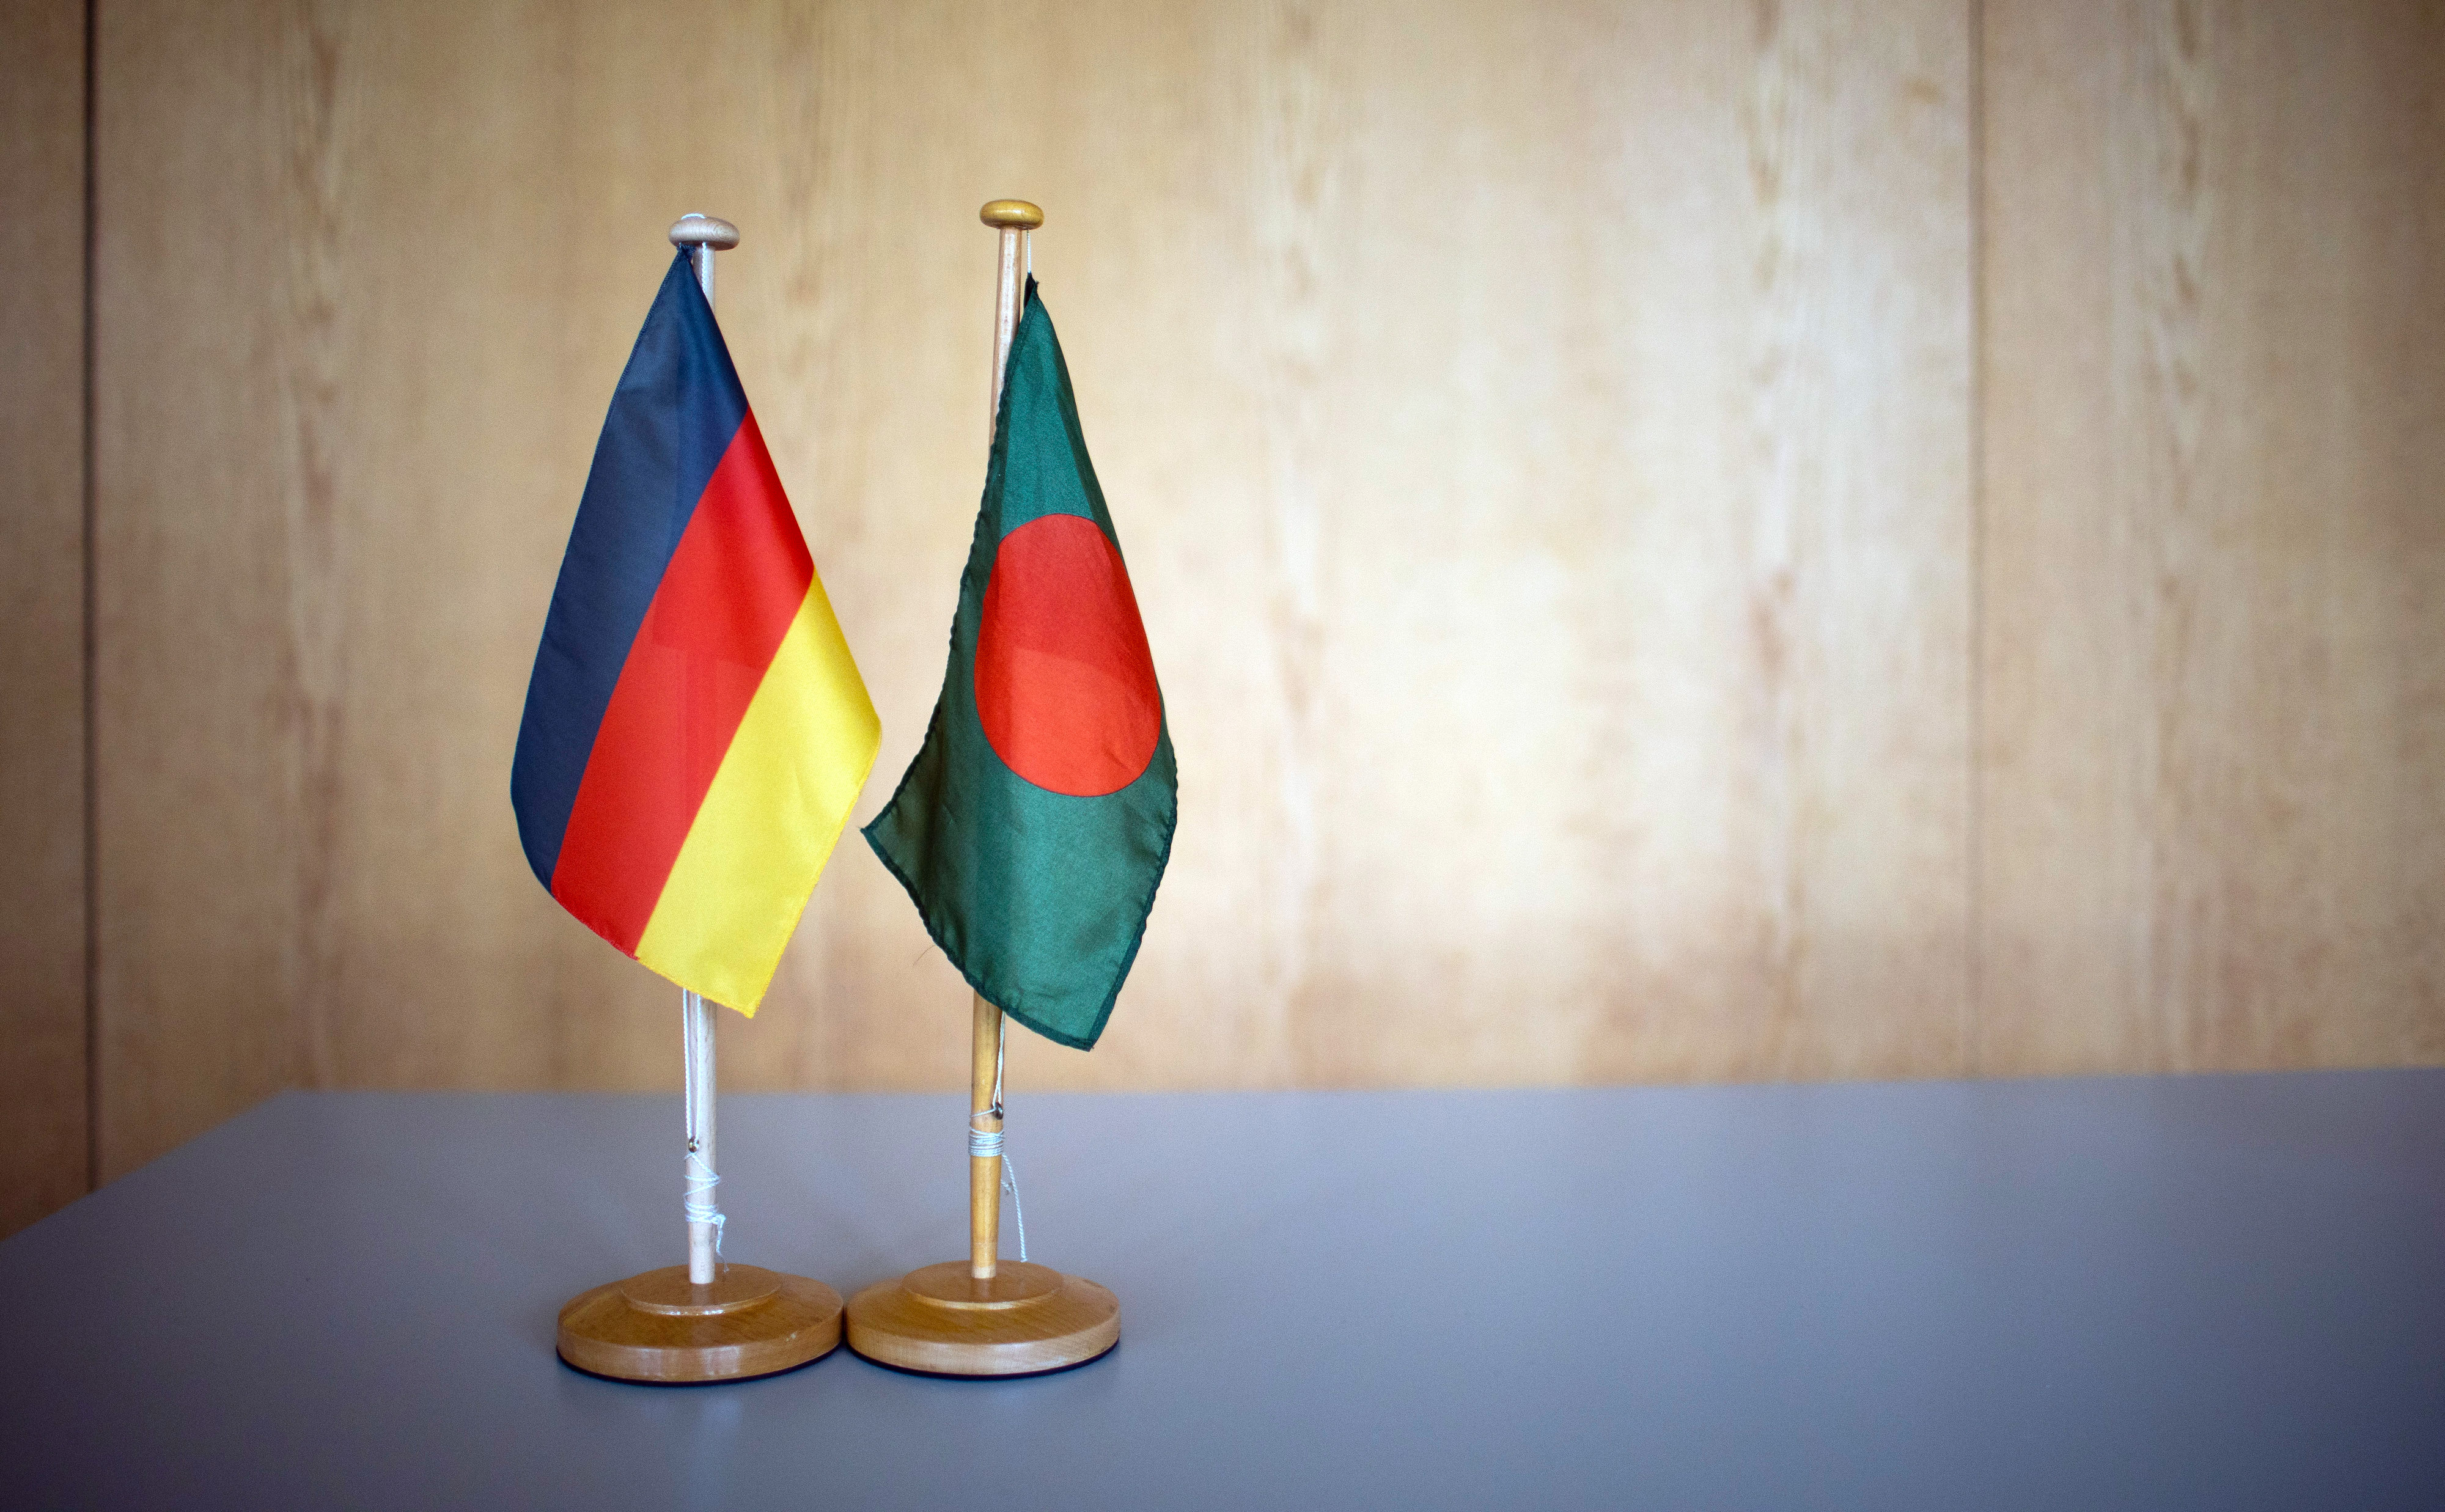 The flags of Germany and Bangladesh